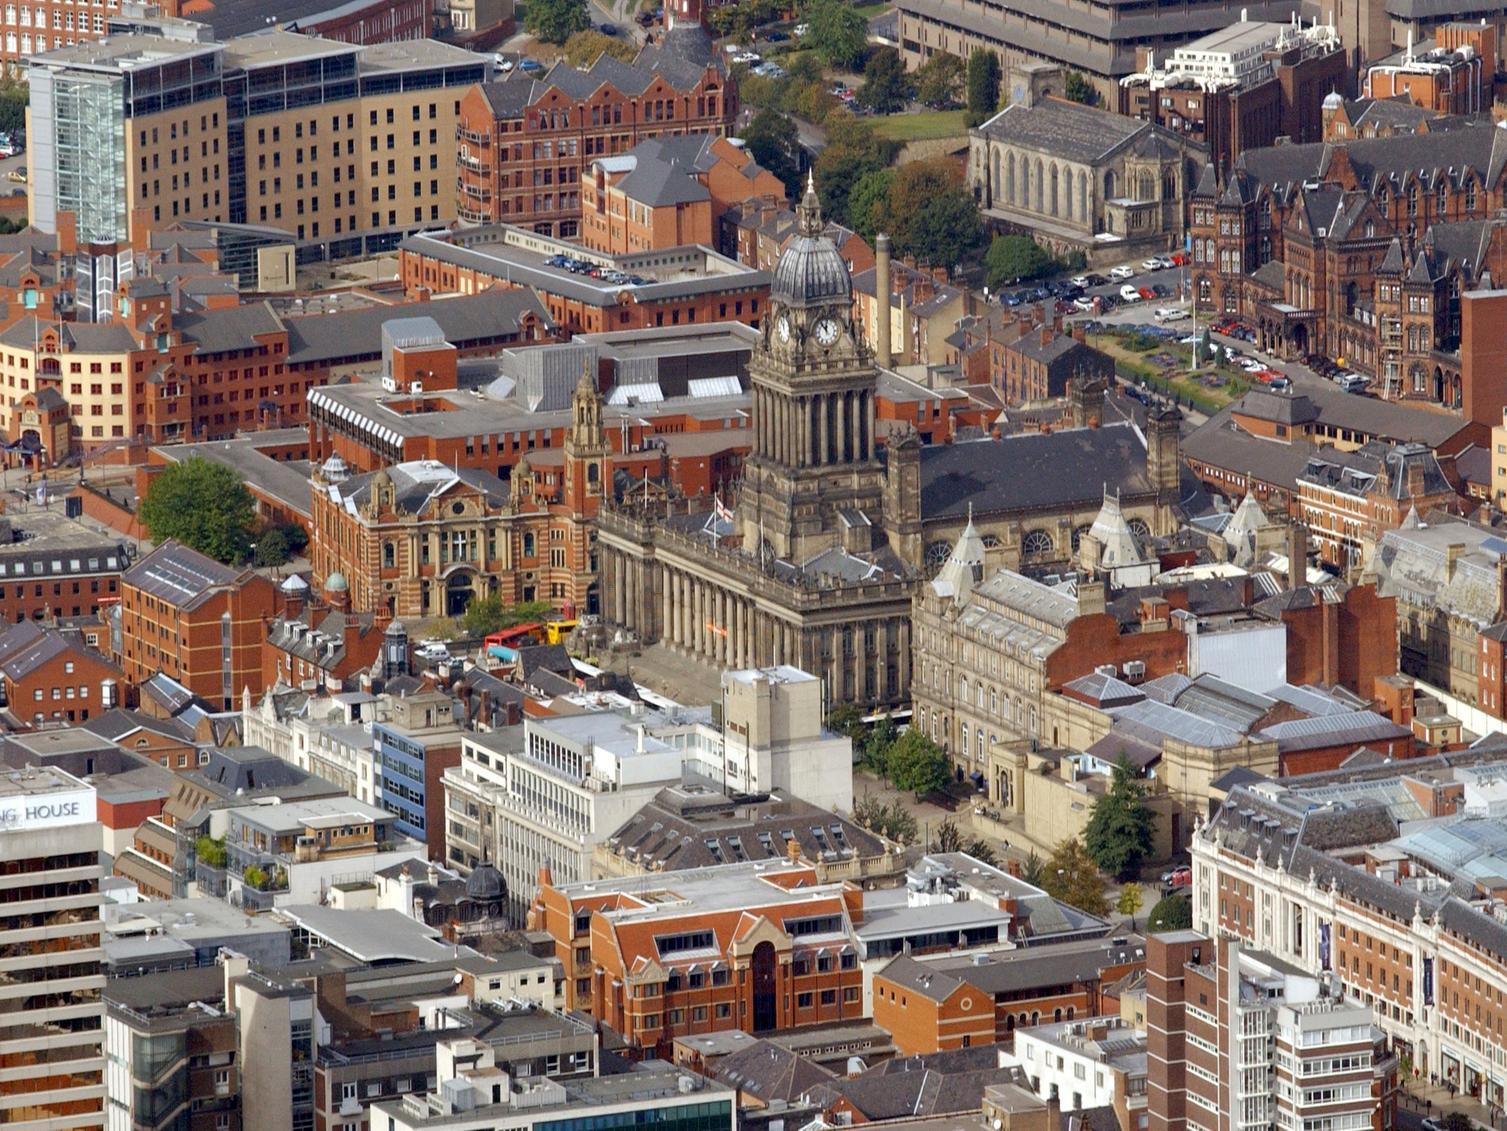 How many city centre landmarks can you spot on this photo? The Headrow and Leeds Town Hall are two to get you started.